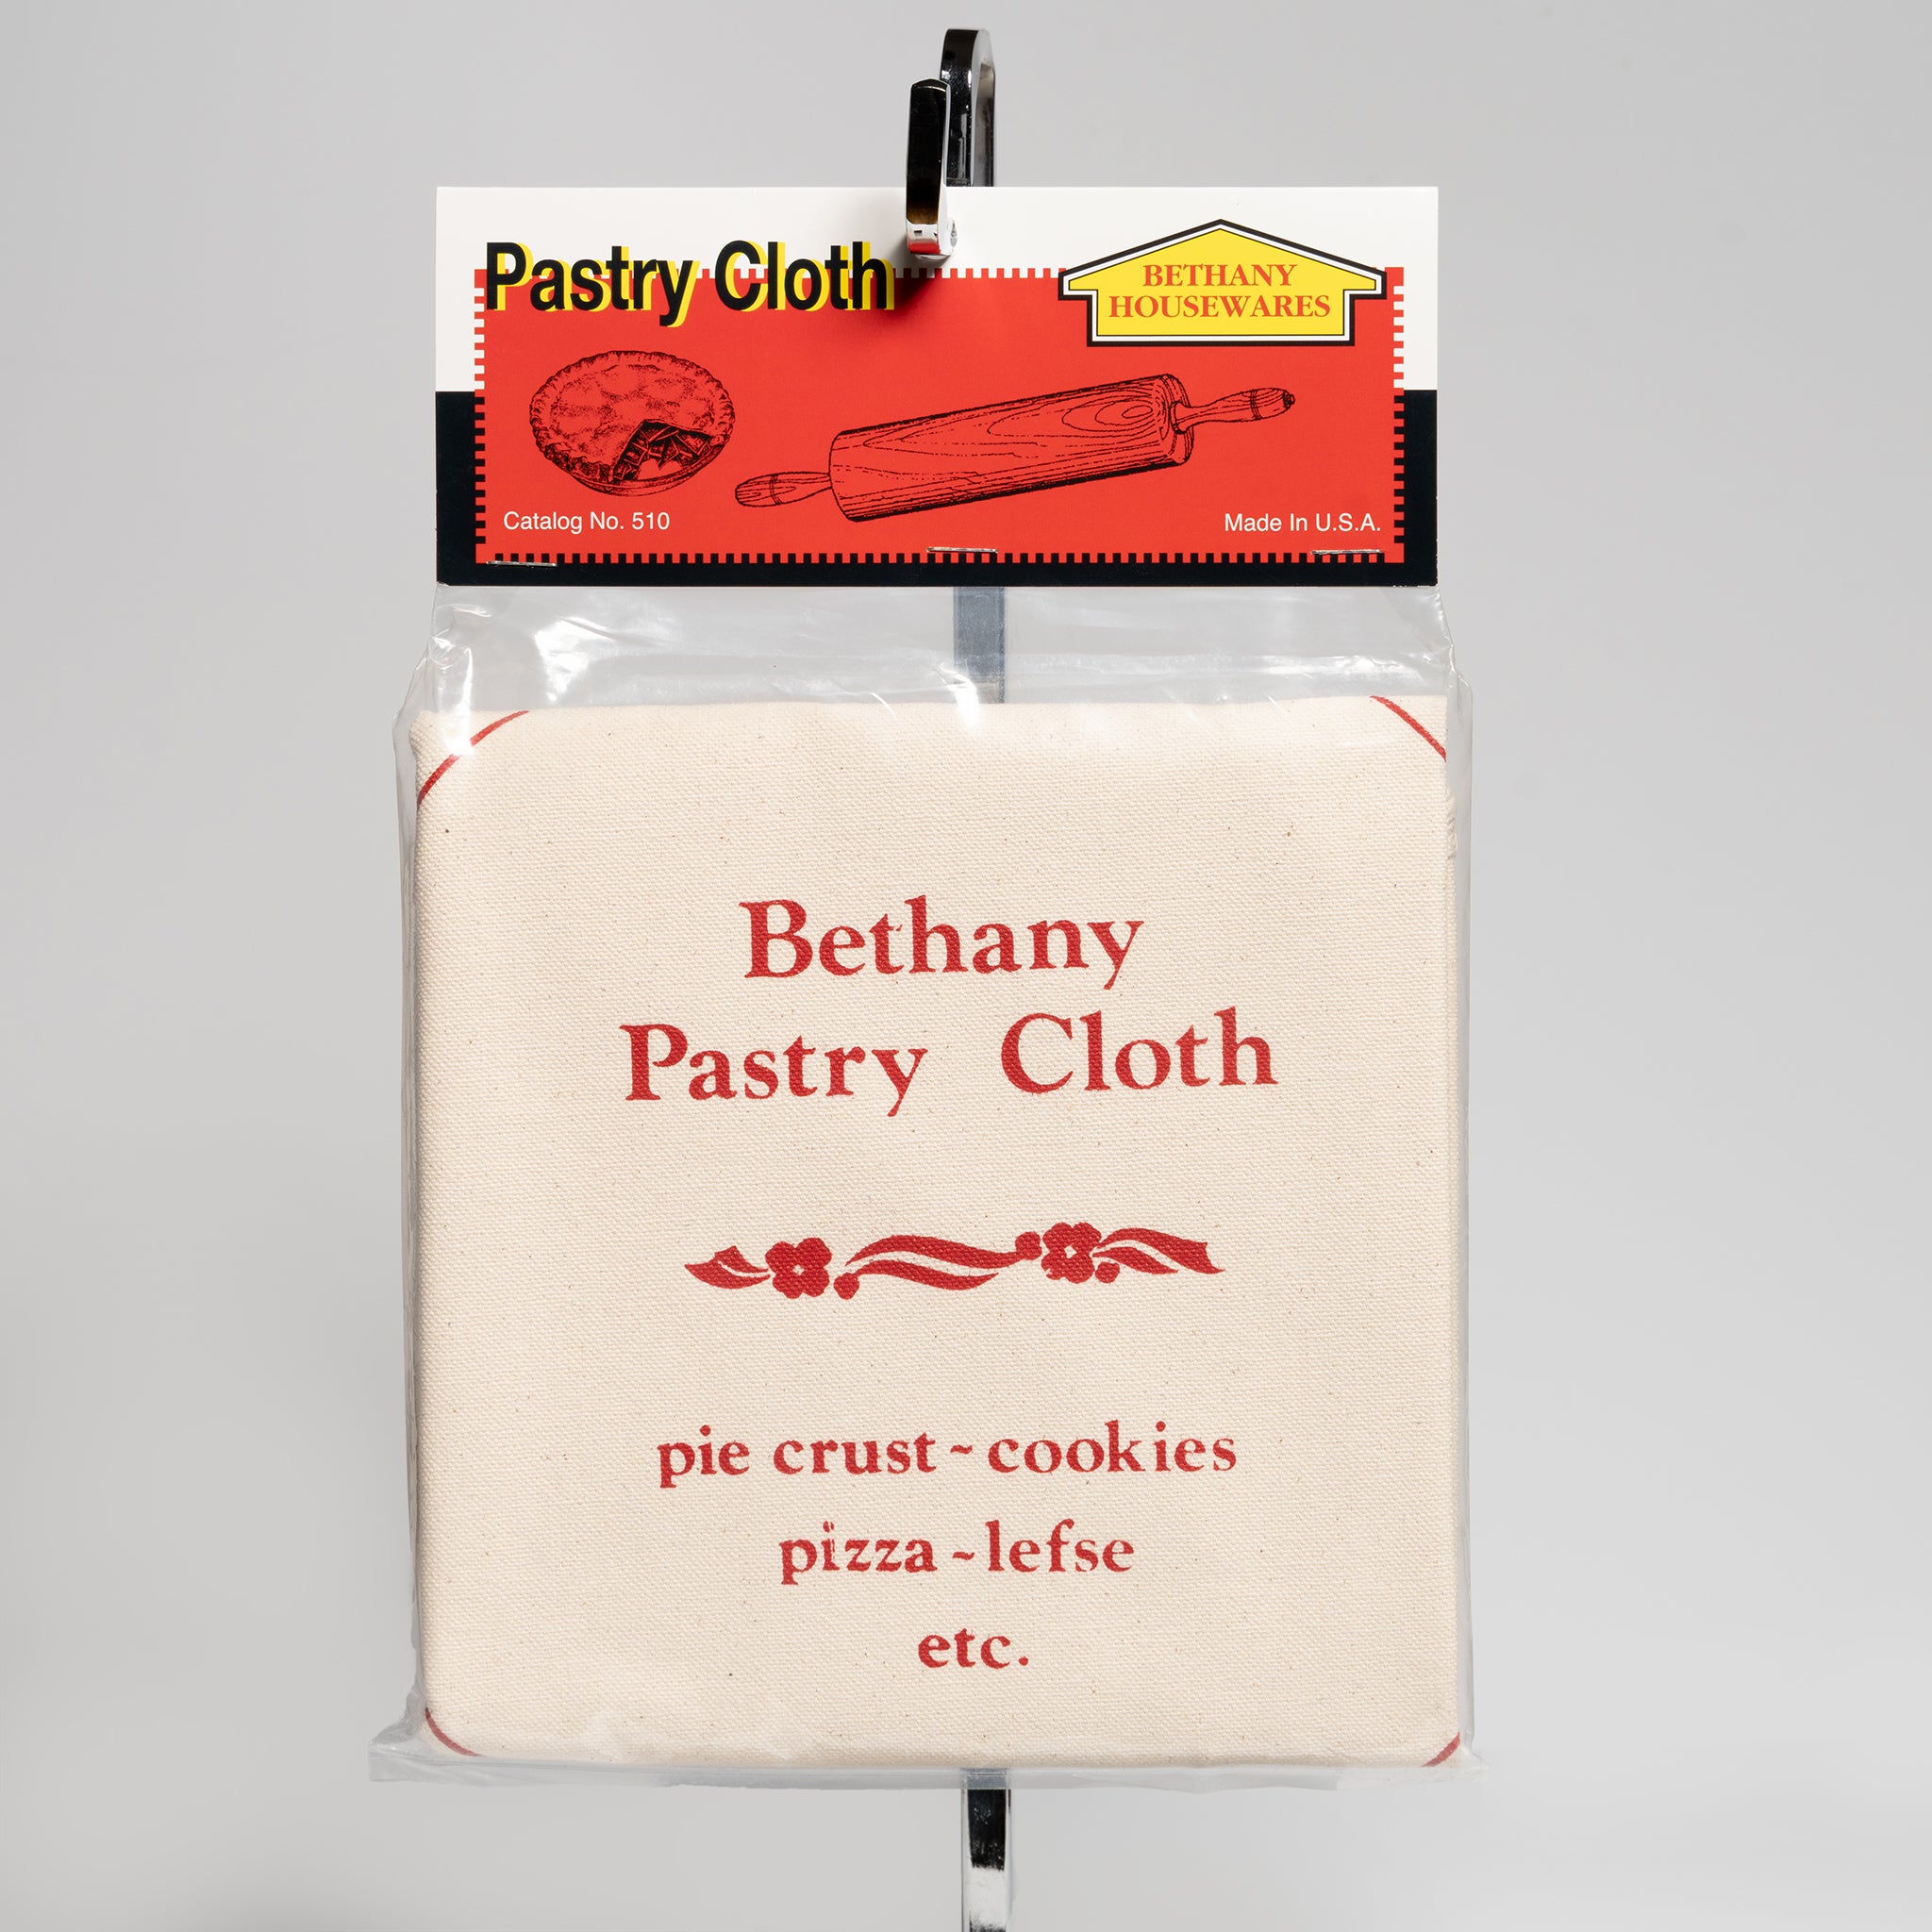 Pastry Cloth by Bethany Housewares